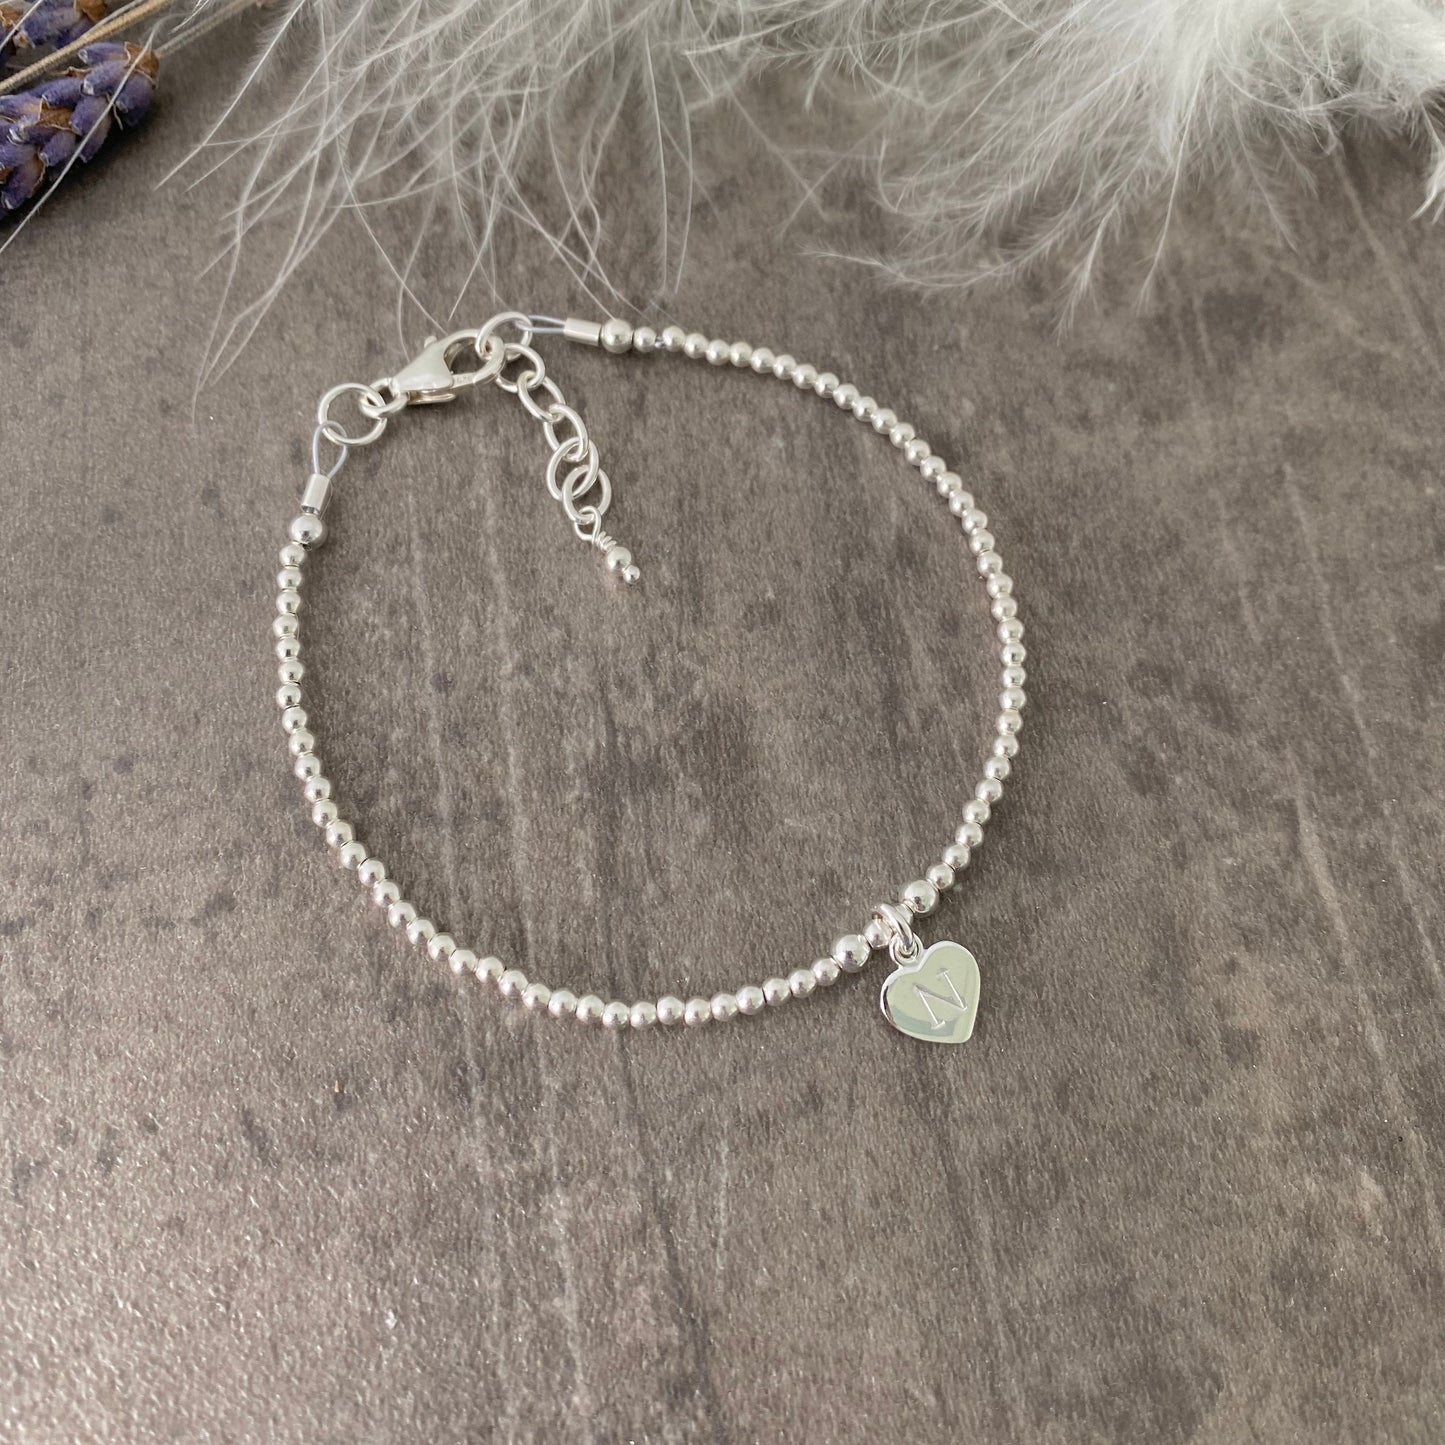 Prom Gift, Sterling Silver Initial Bracelet